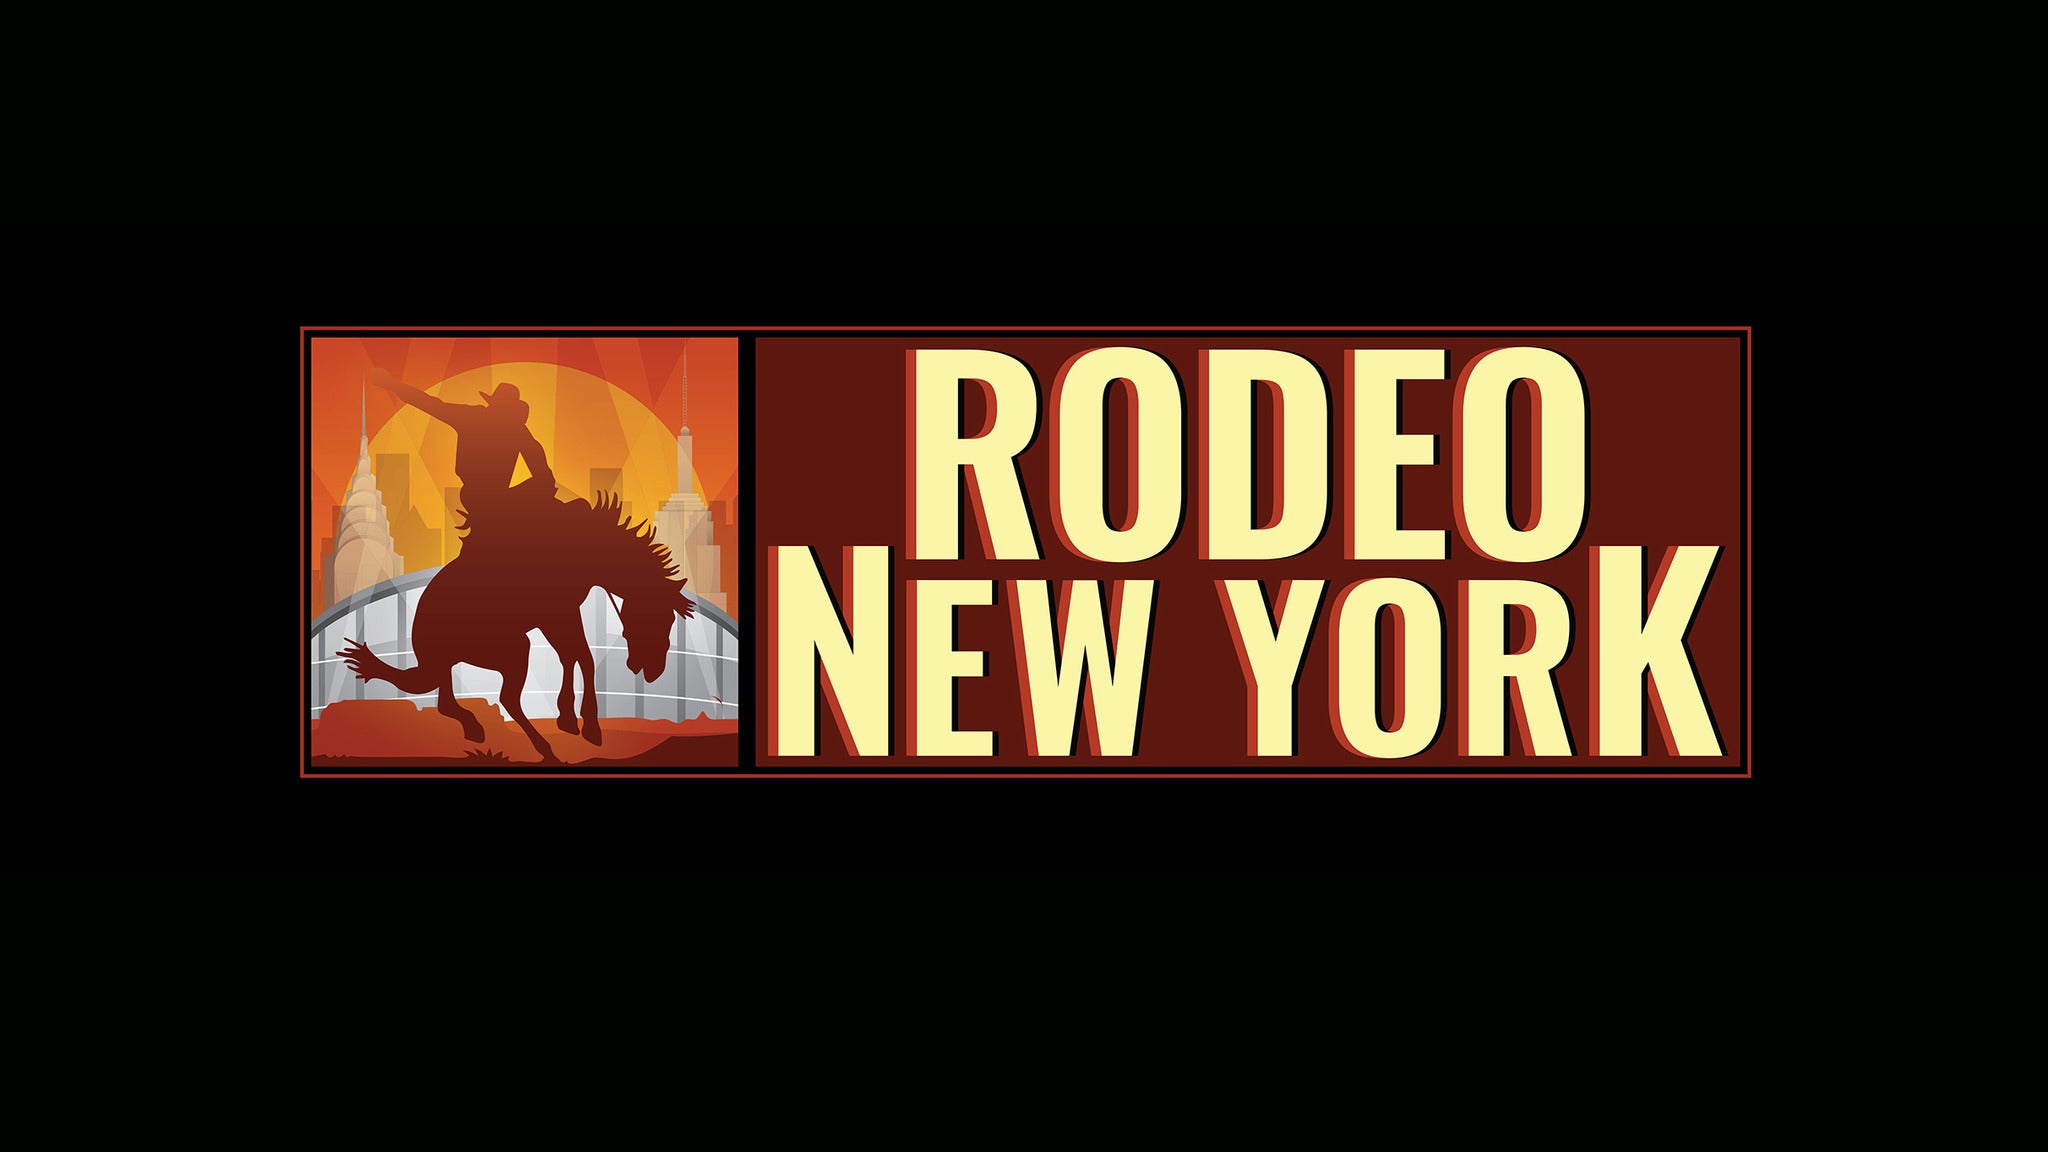 THE COWBOY CHANNEL presents "RODEO NEW YORK" in New York promo photo for Internet presale offer code